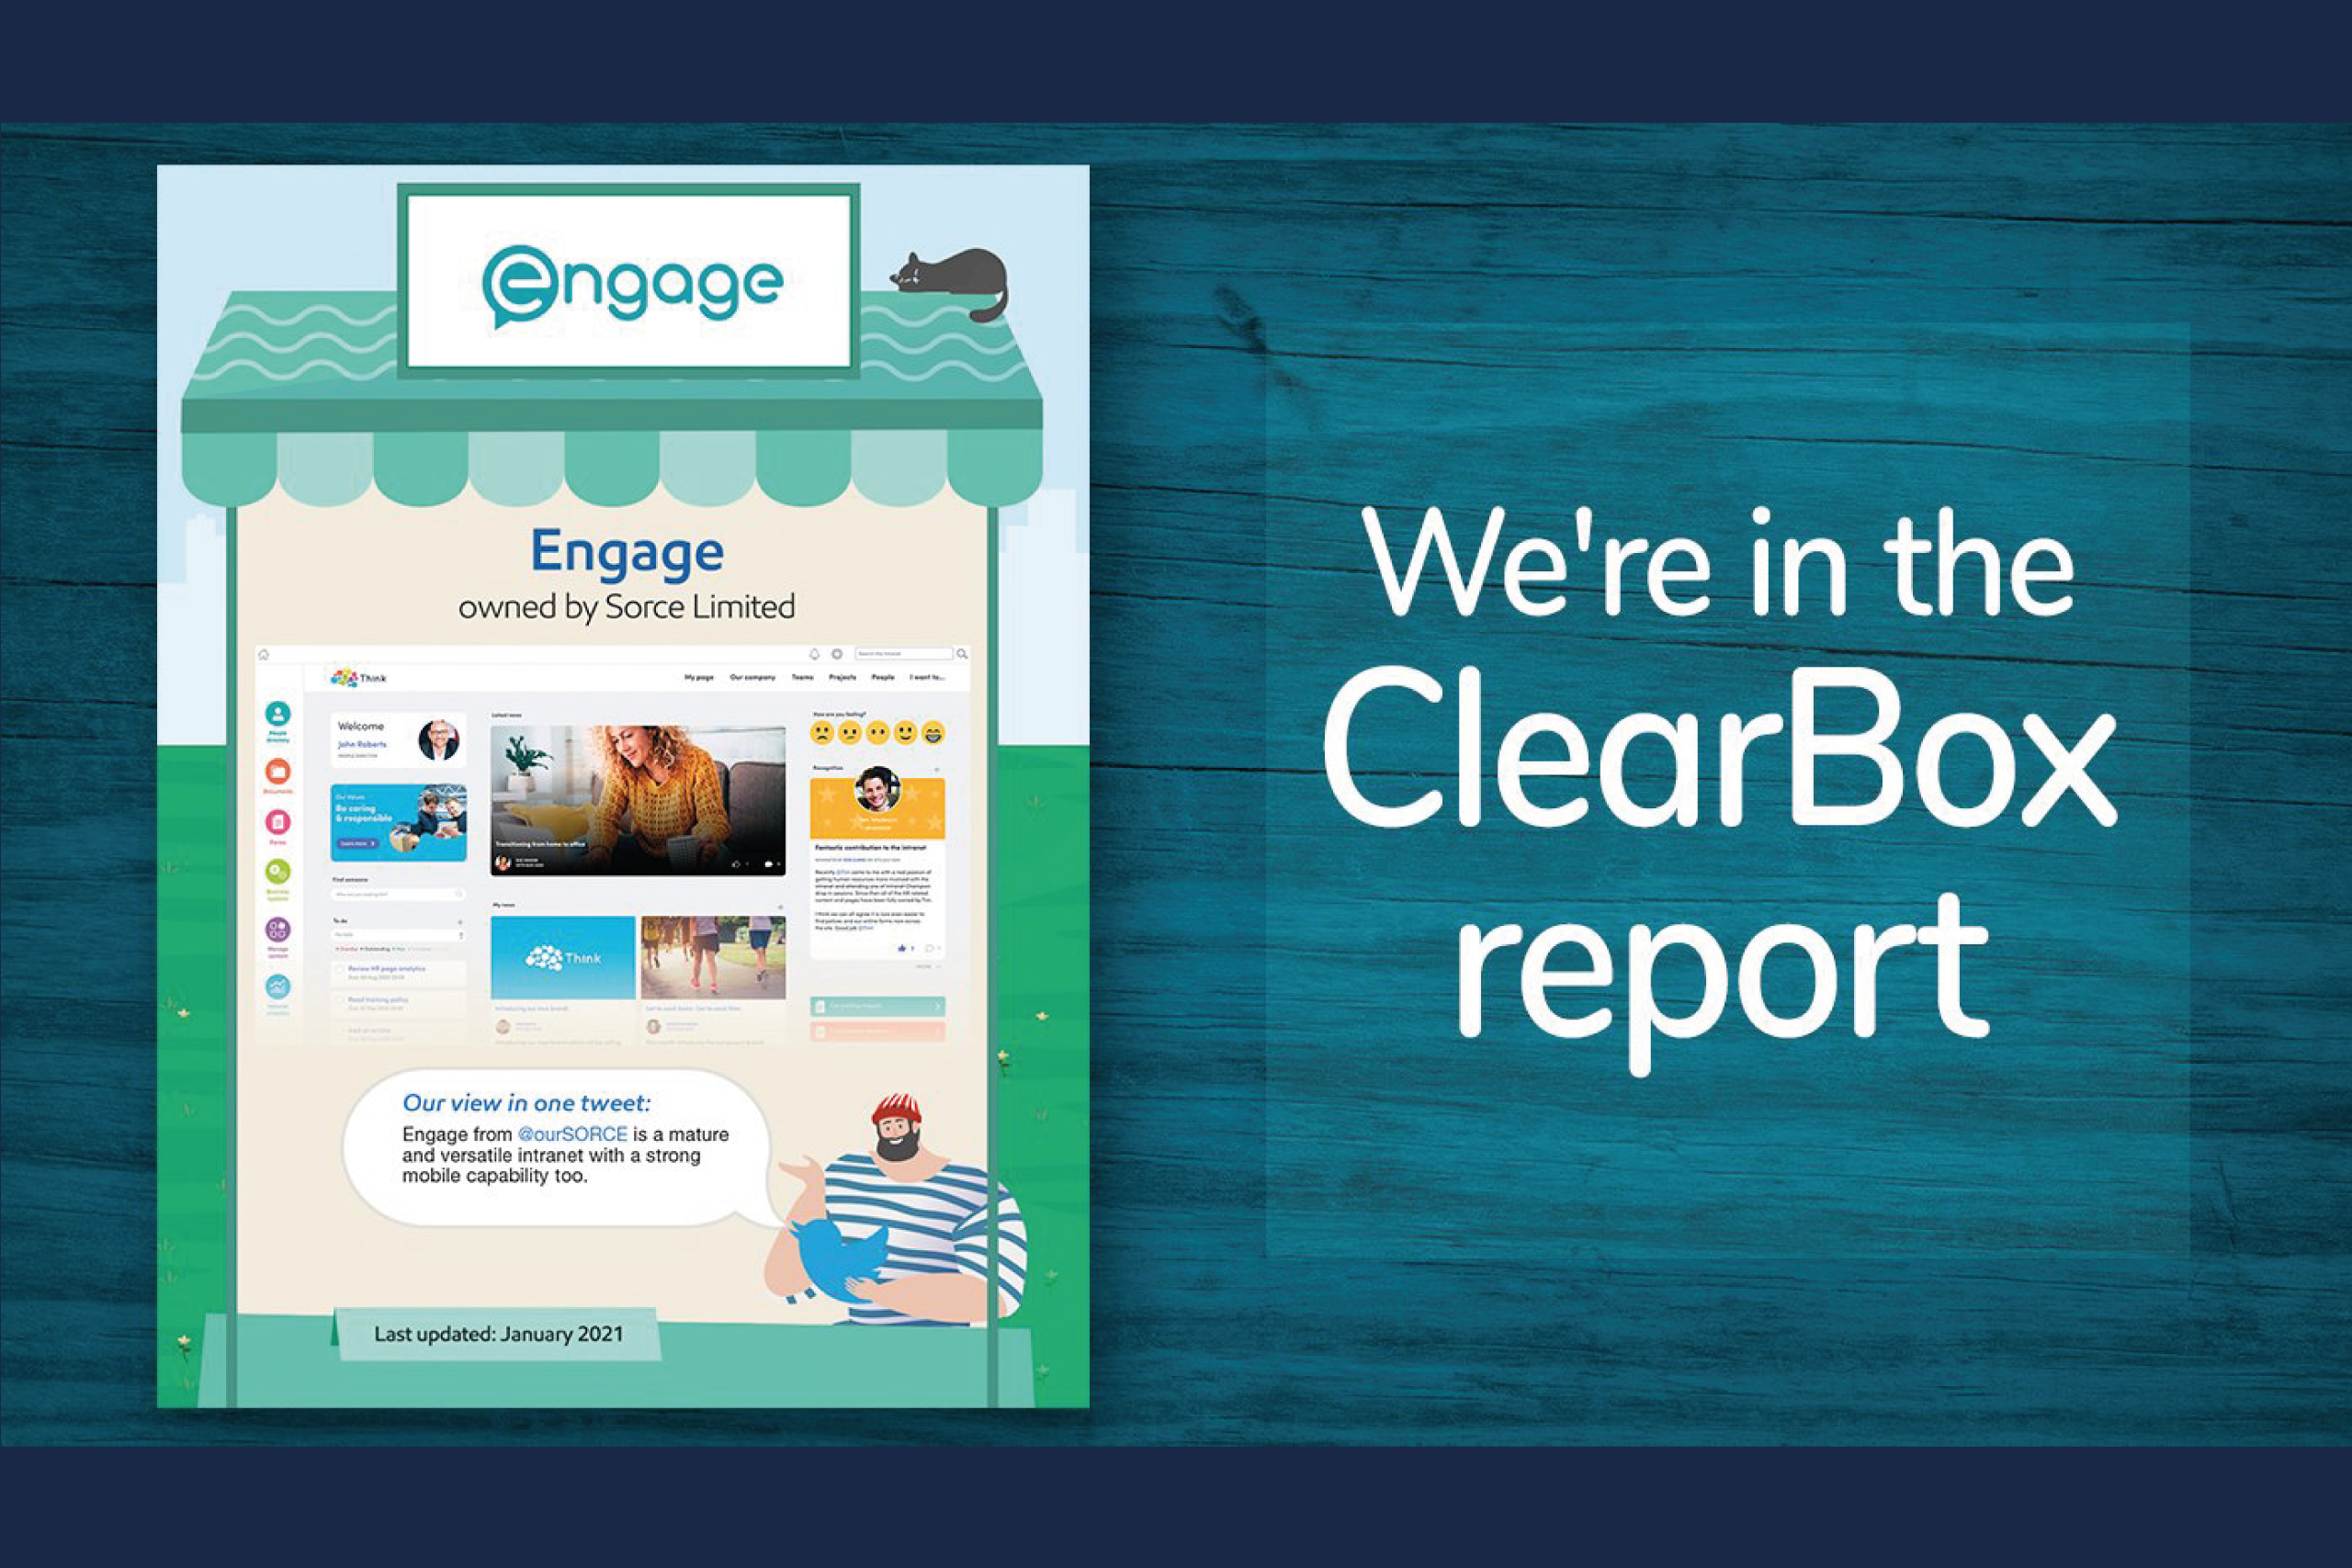 Engage intranet software included in the latest ClearBox report